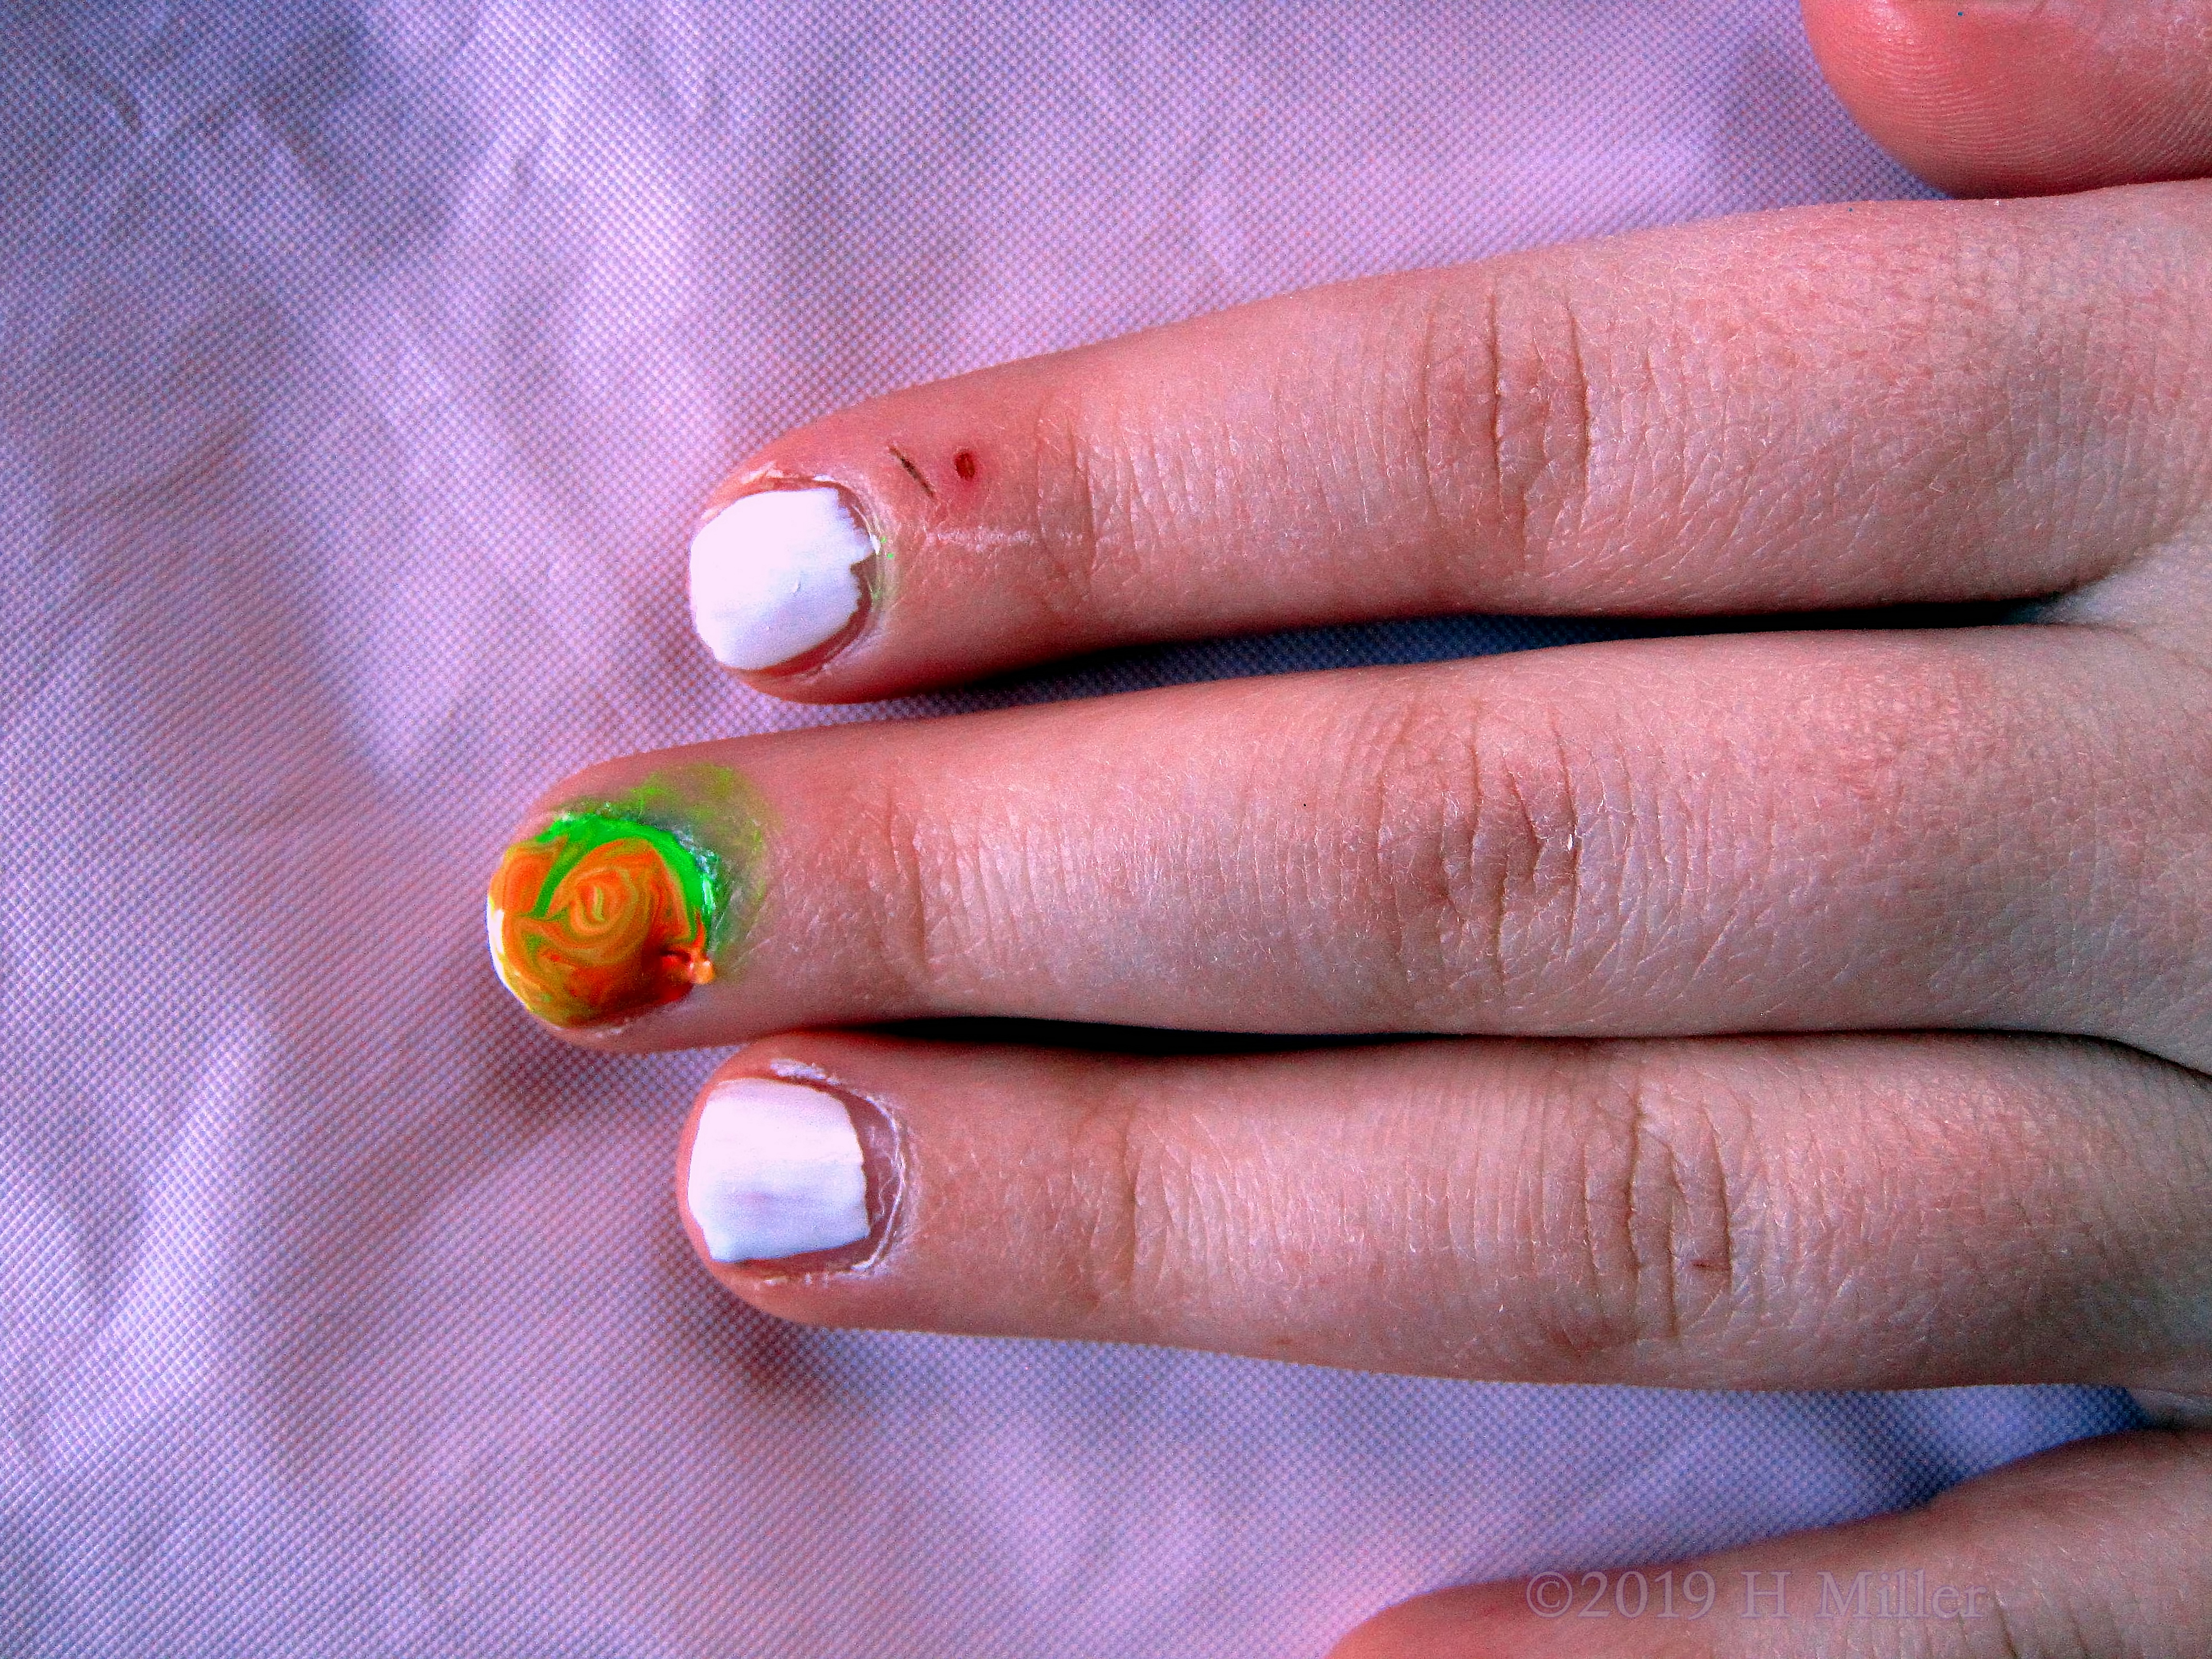 Kids Manicure With White, Plus A Multicolor Marbled Nail Design With Green And Orange Swirls 